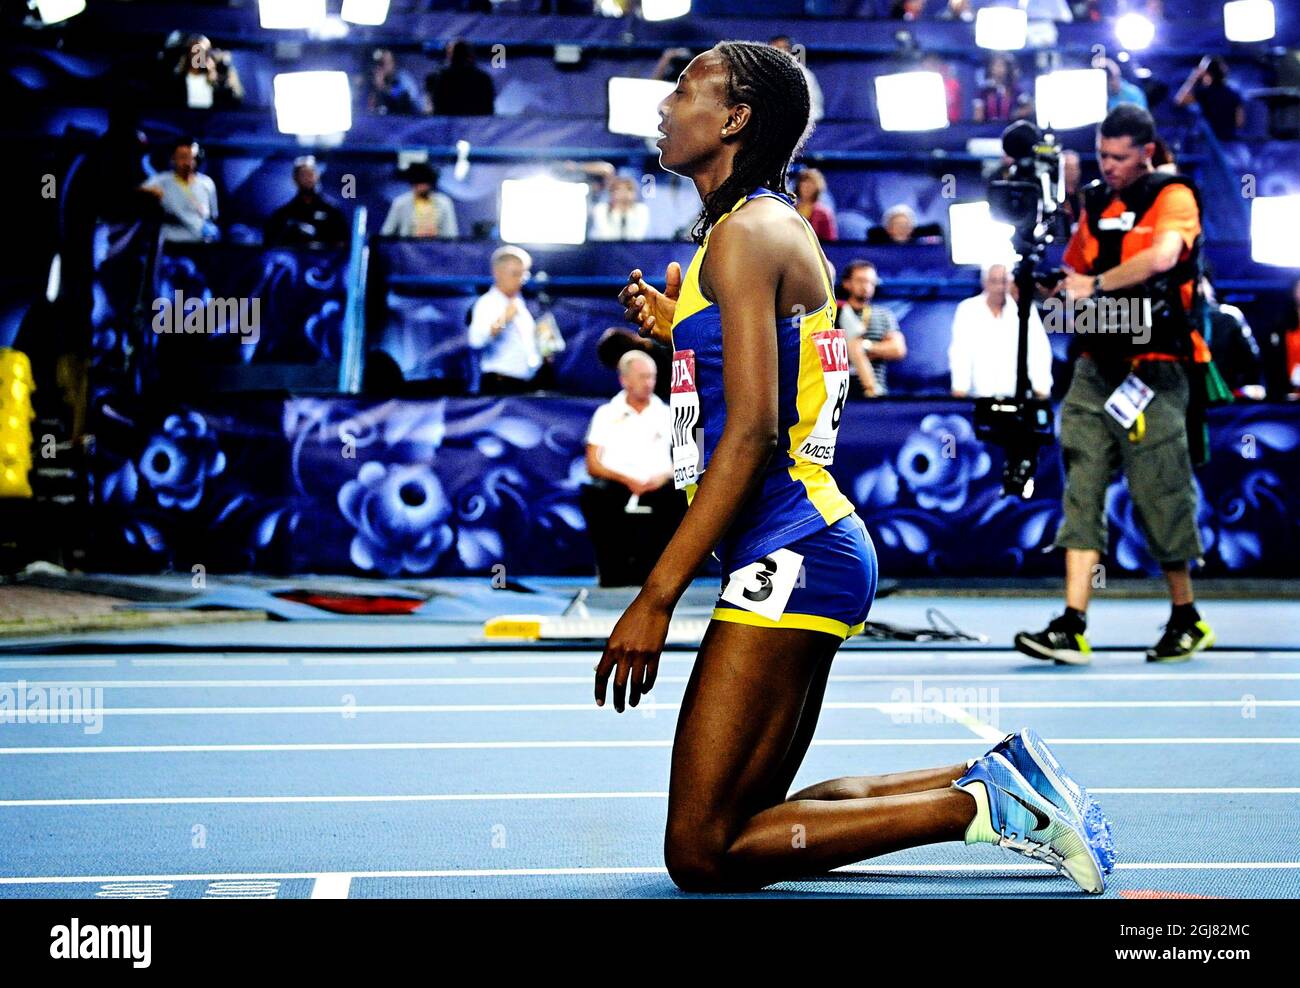 Sweden's Abeba Aregawi reacts after winning the women's 1500 metres final at the 2013 IAAF World Championships at the Luzhniki stadium in Moscow on August 15, 2013. Photo Erik Martensson / SCANPIX / Kod 10400  Stock Photo